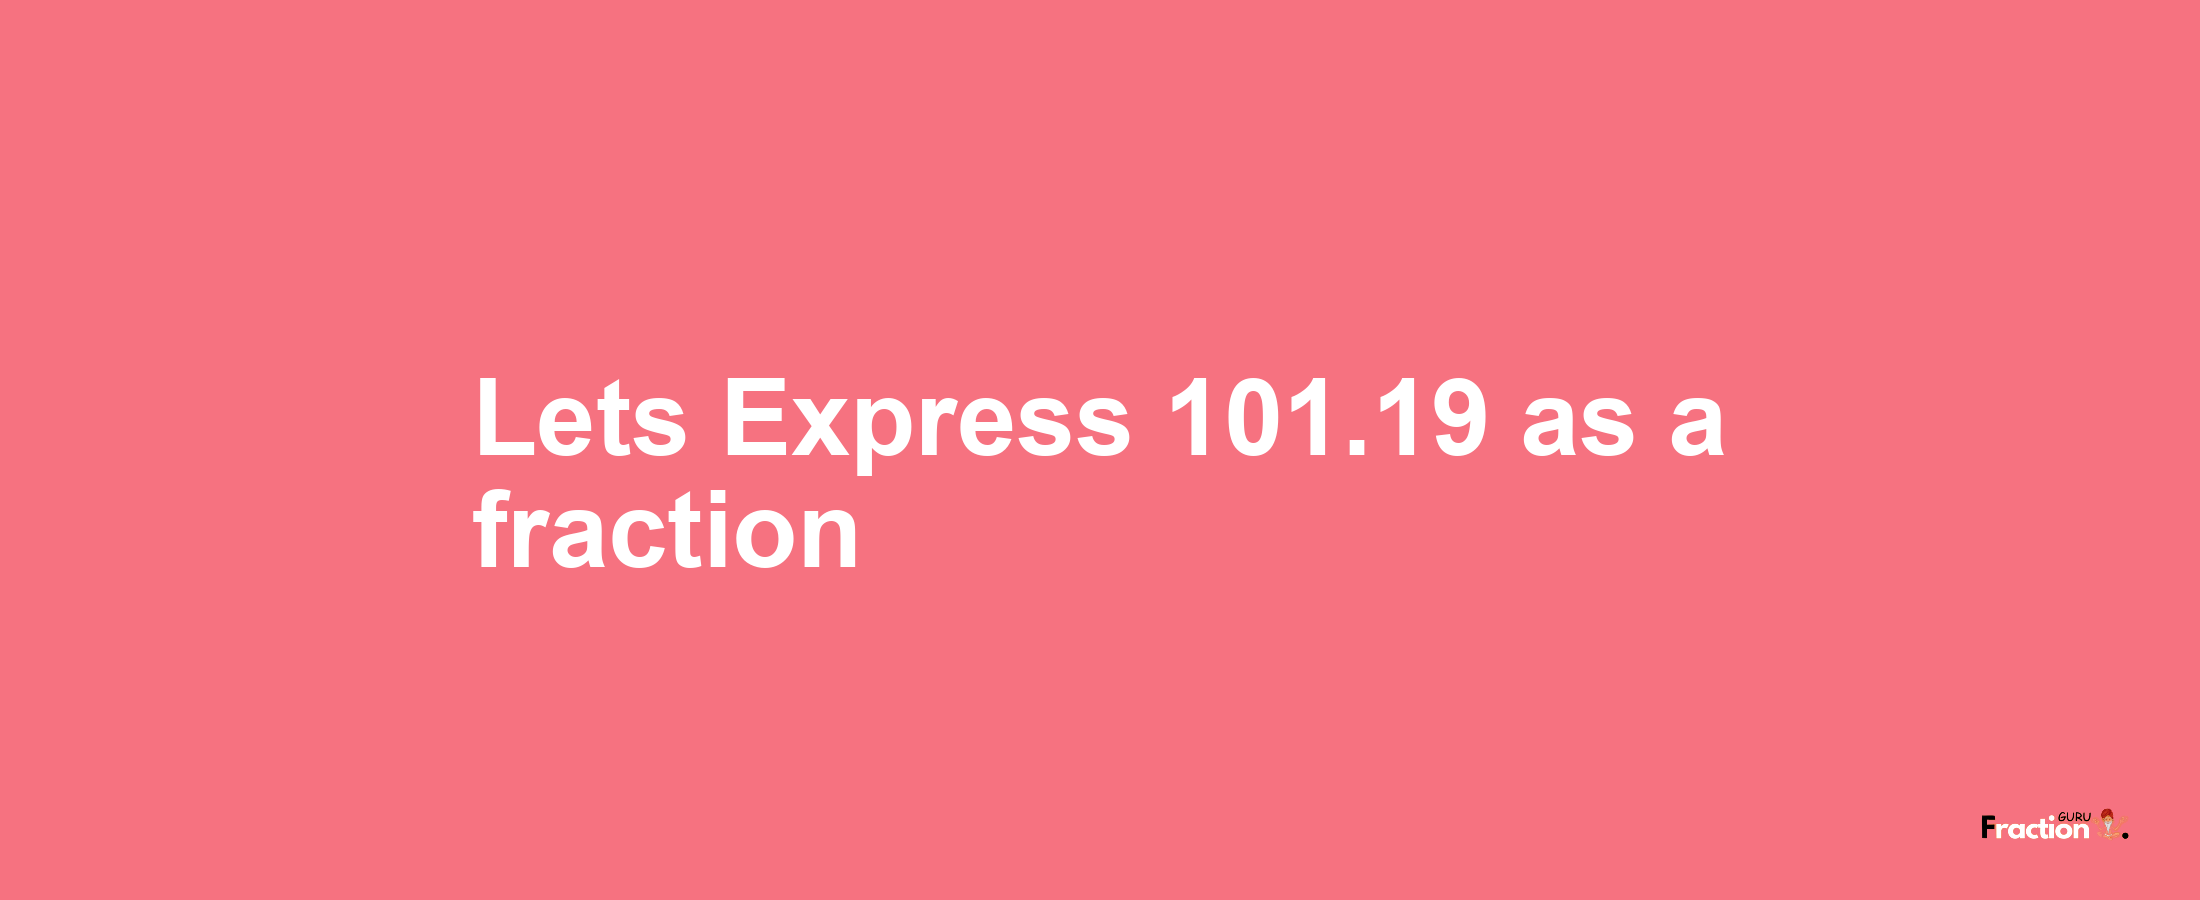 Lets Express 101.19 as afraction